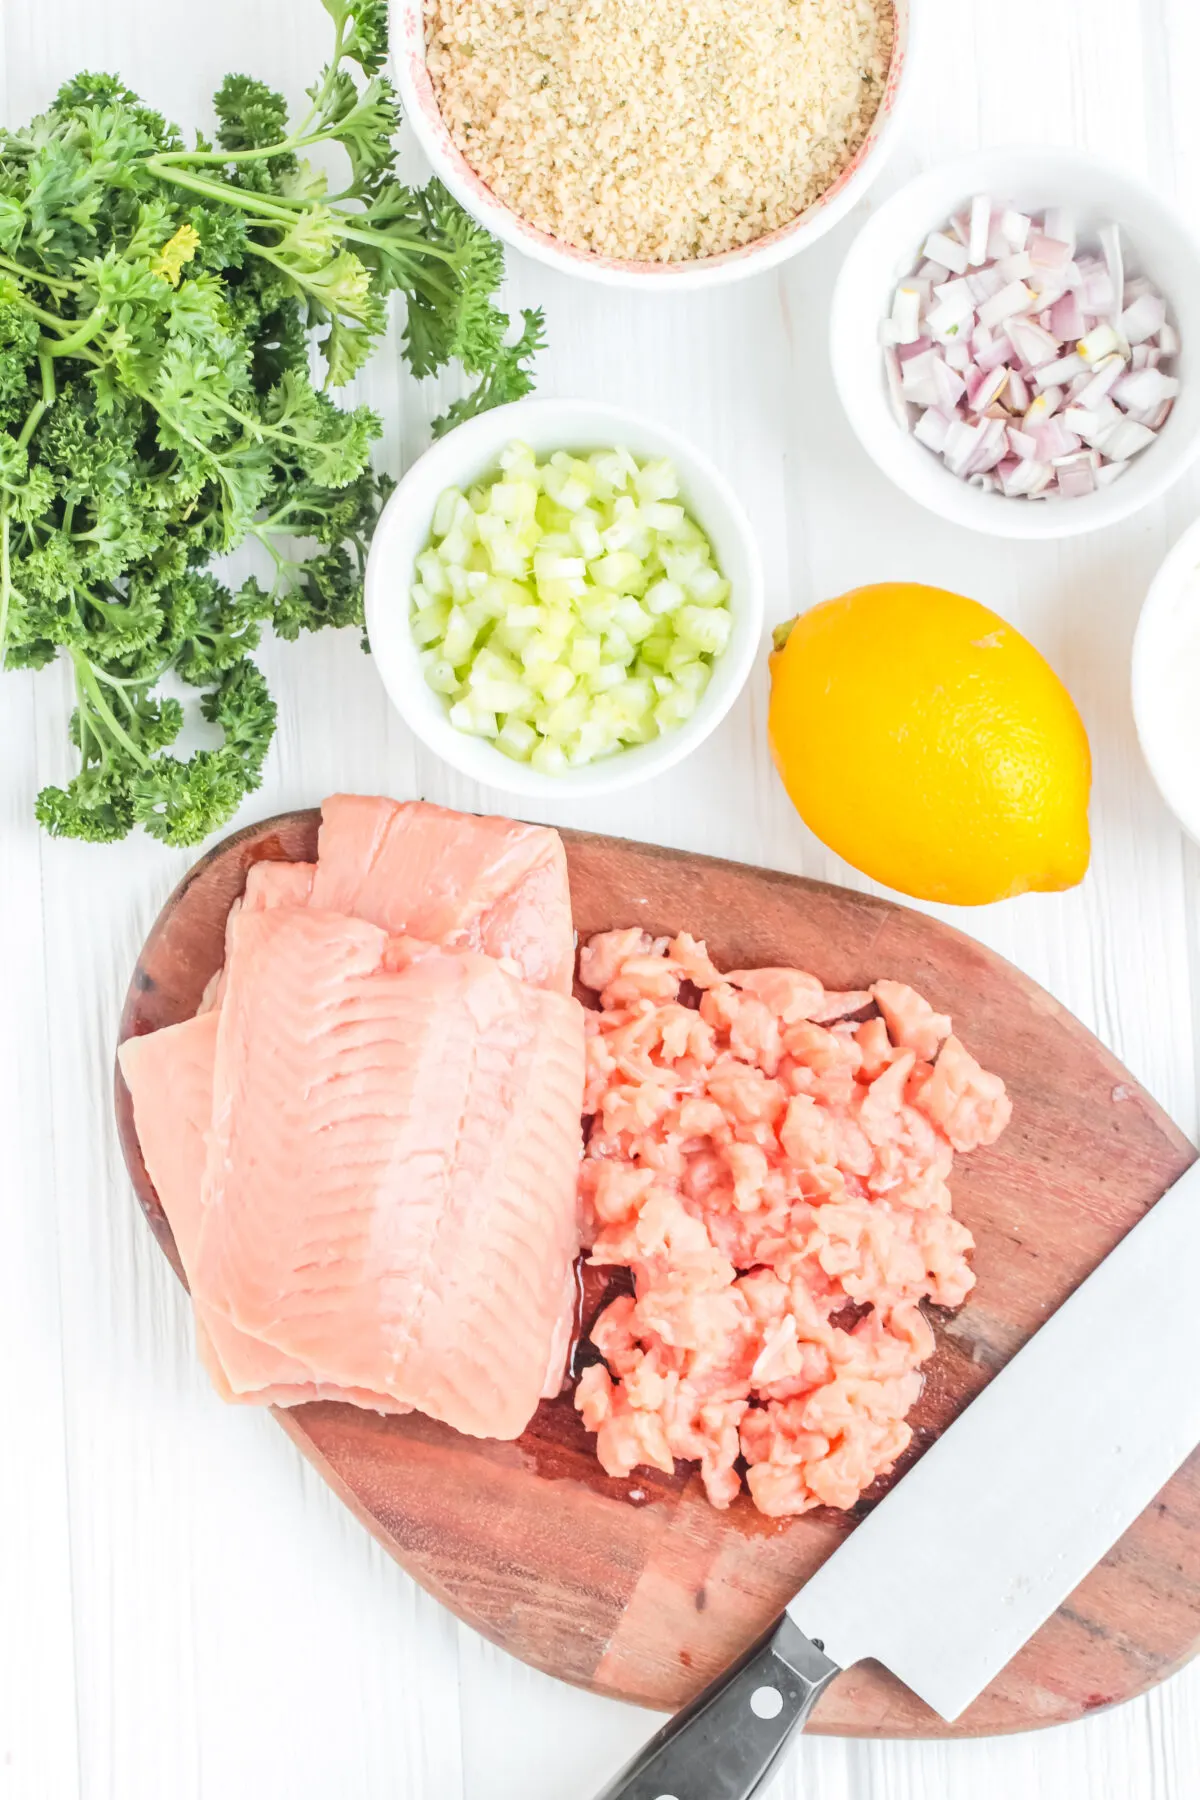 Ingredients for Salmon Cakes.